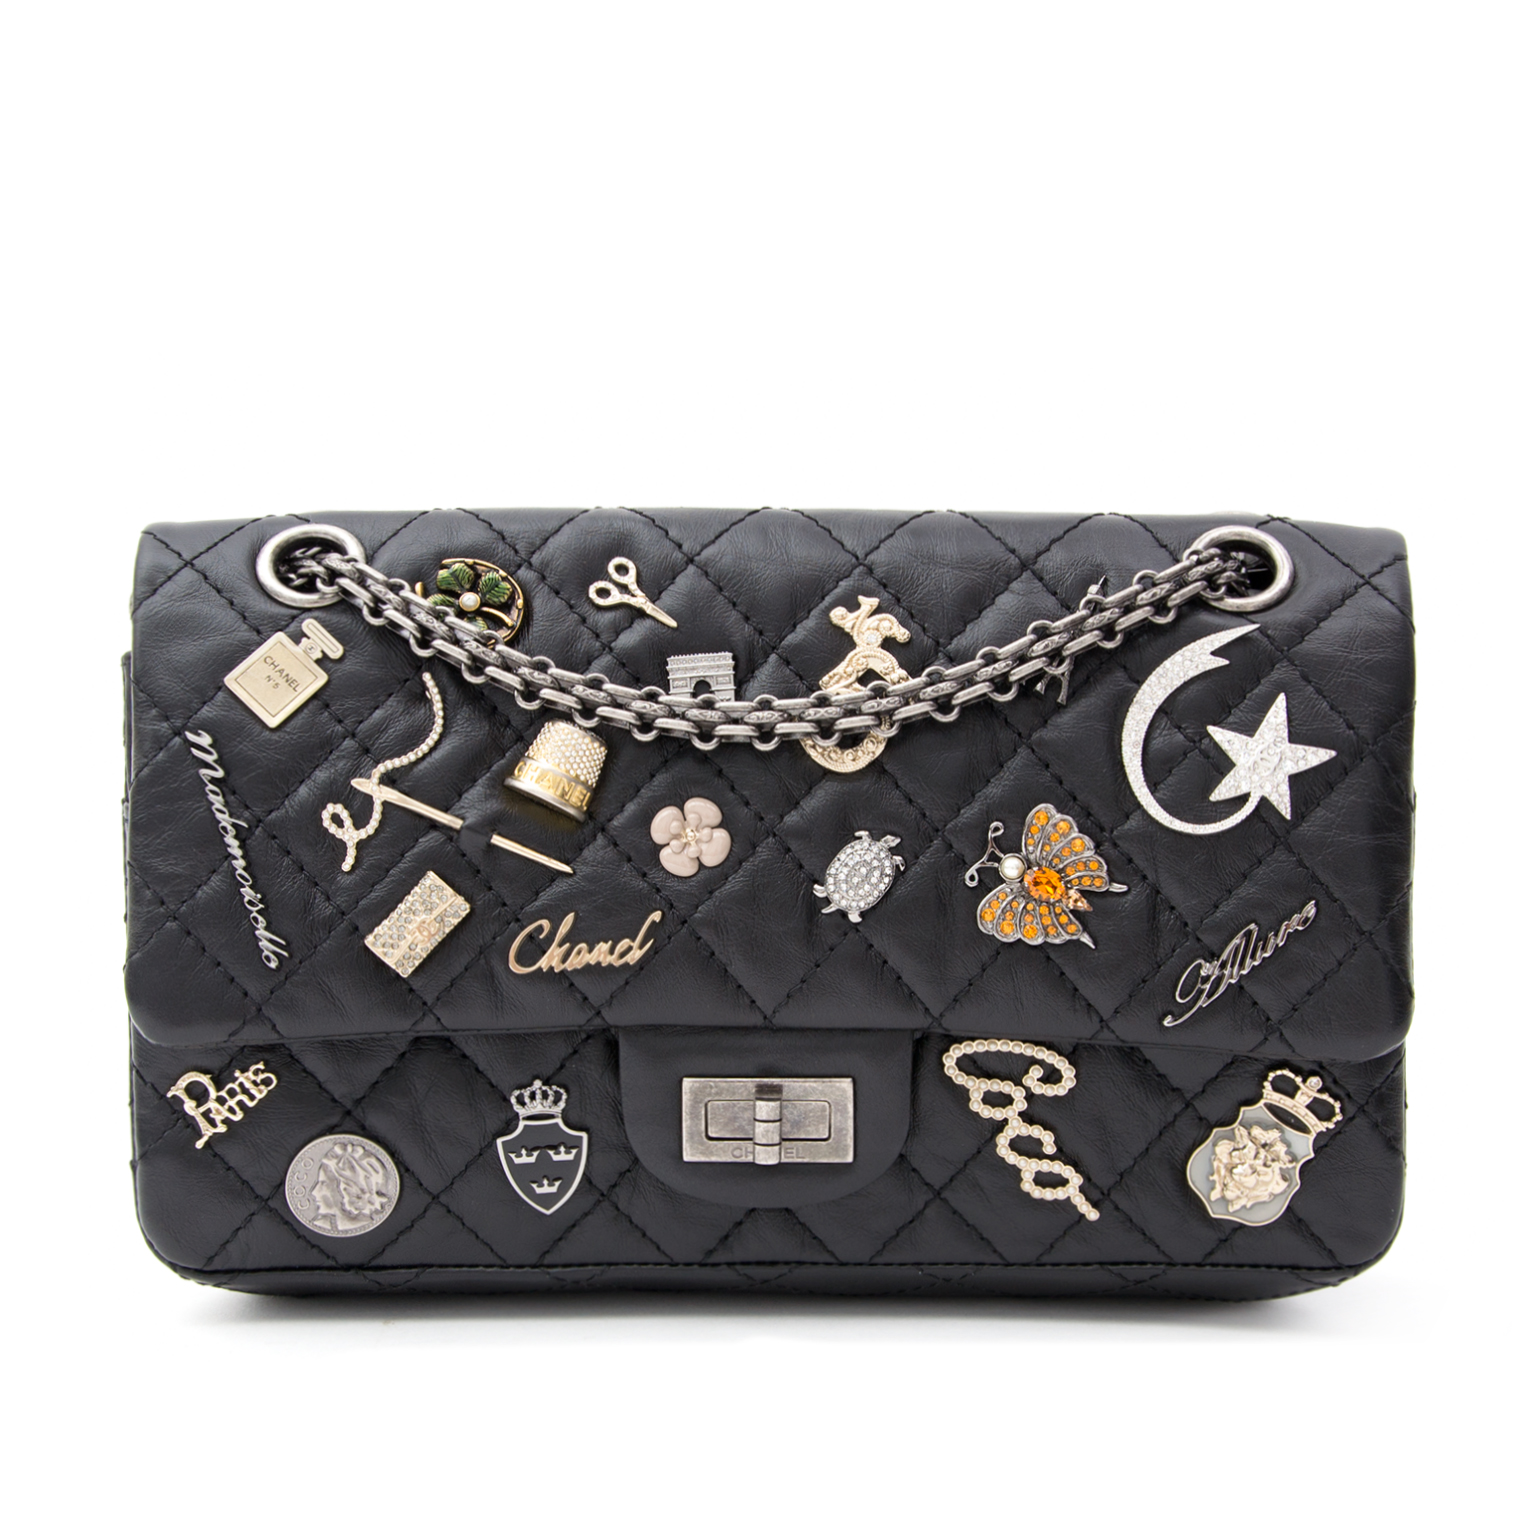 Rare Chanel Lucky Charm 2.55 Reissue Double Flap Bag 225